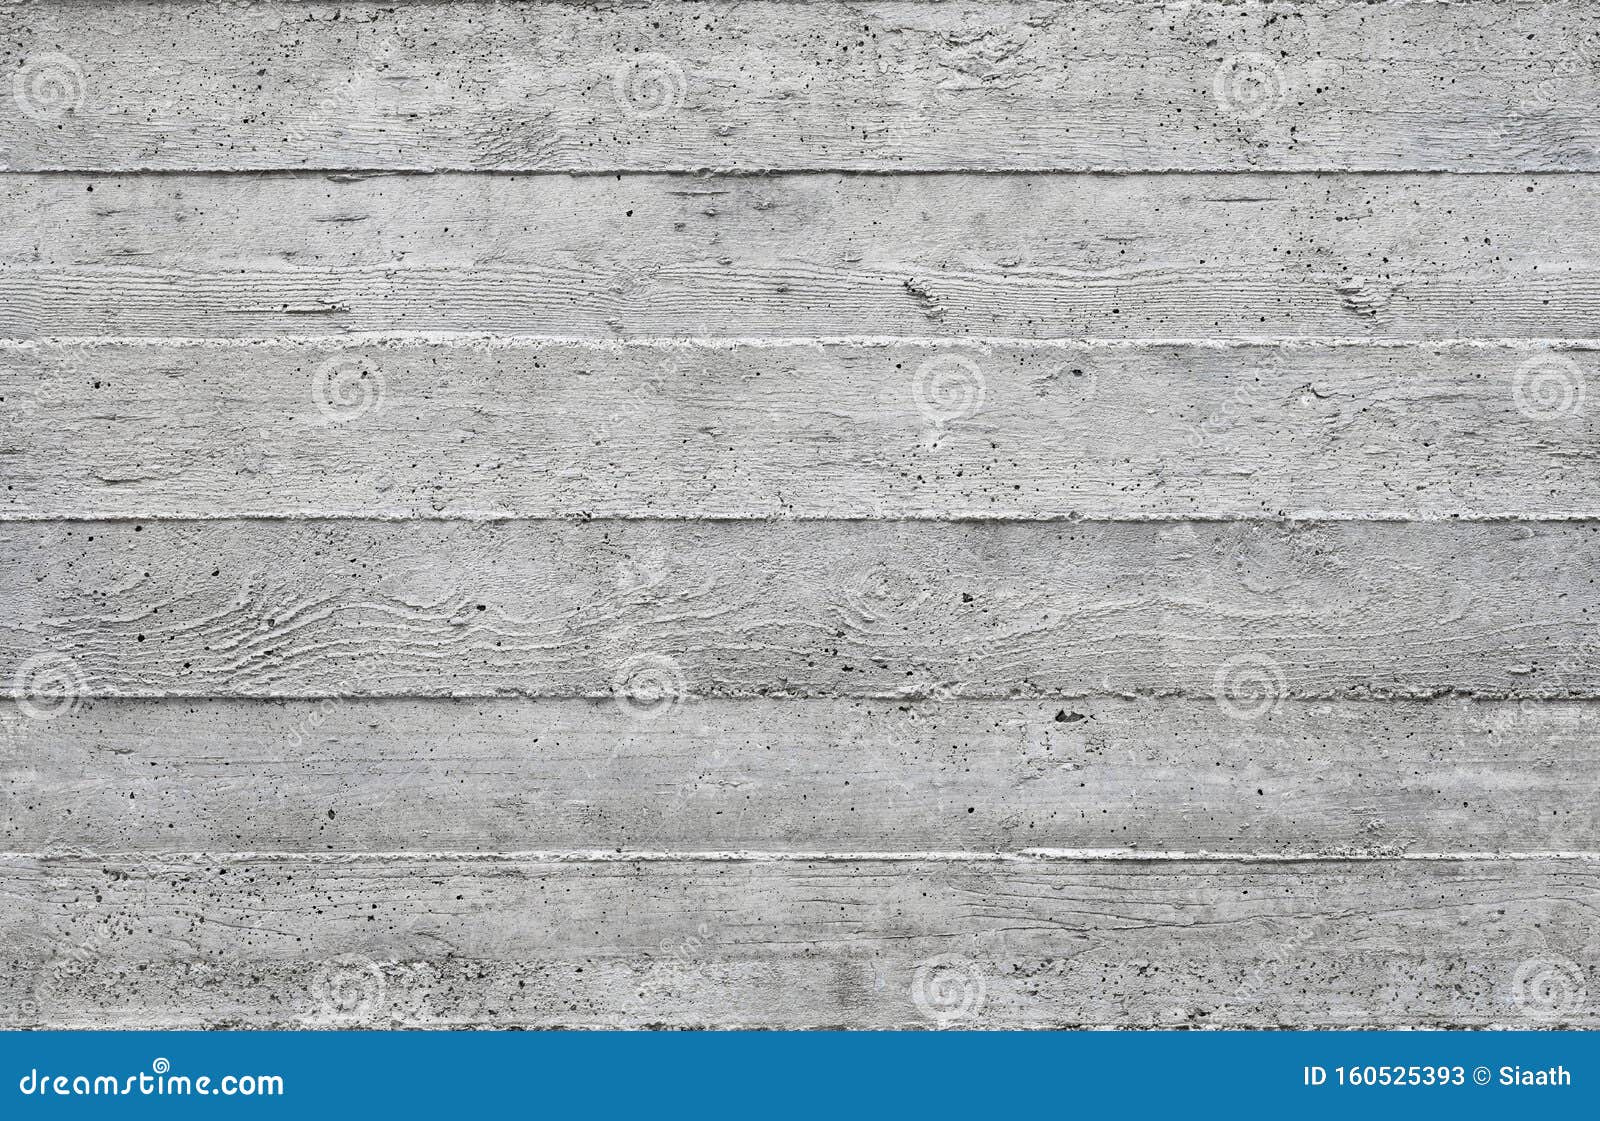 Board Formed Concrete Seamless Texture Stock Image - Image of